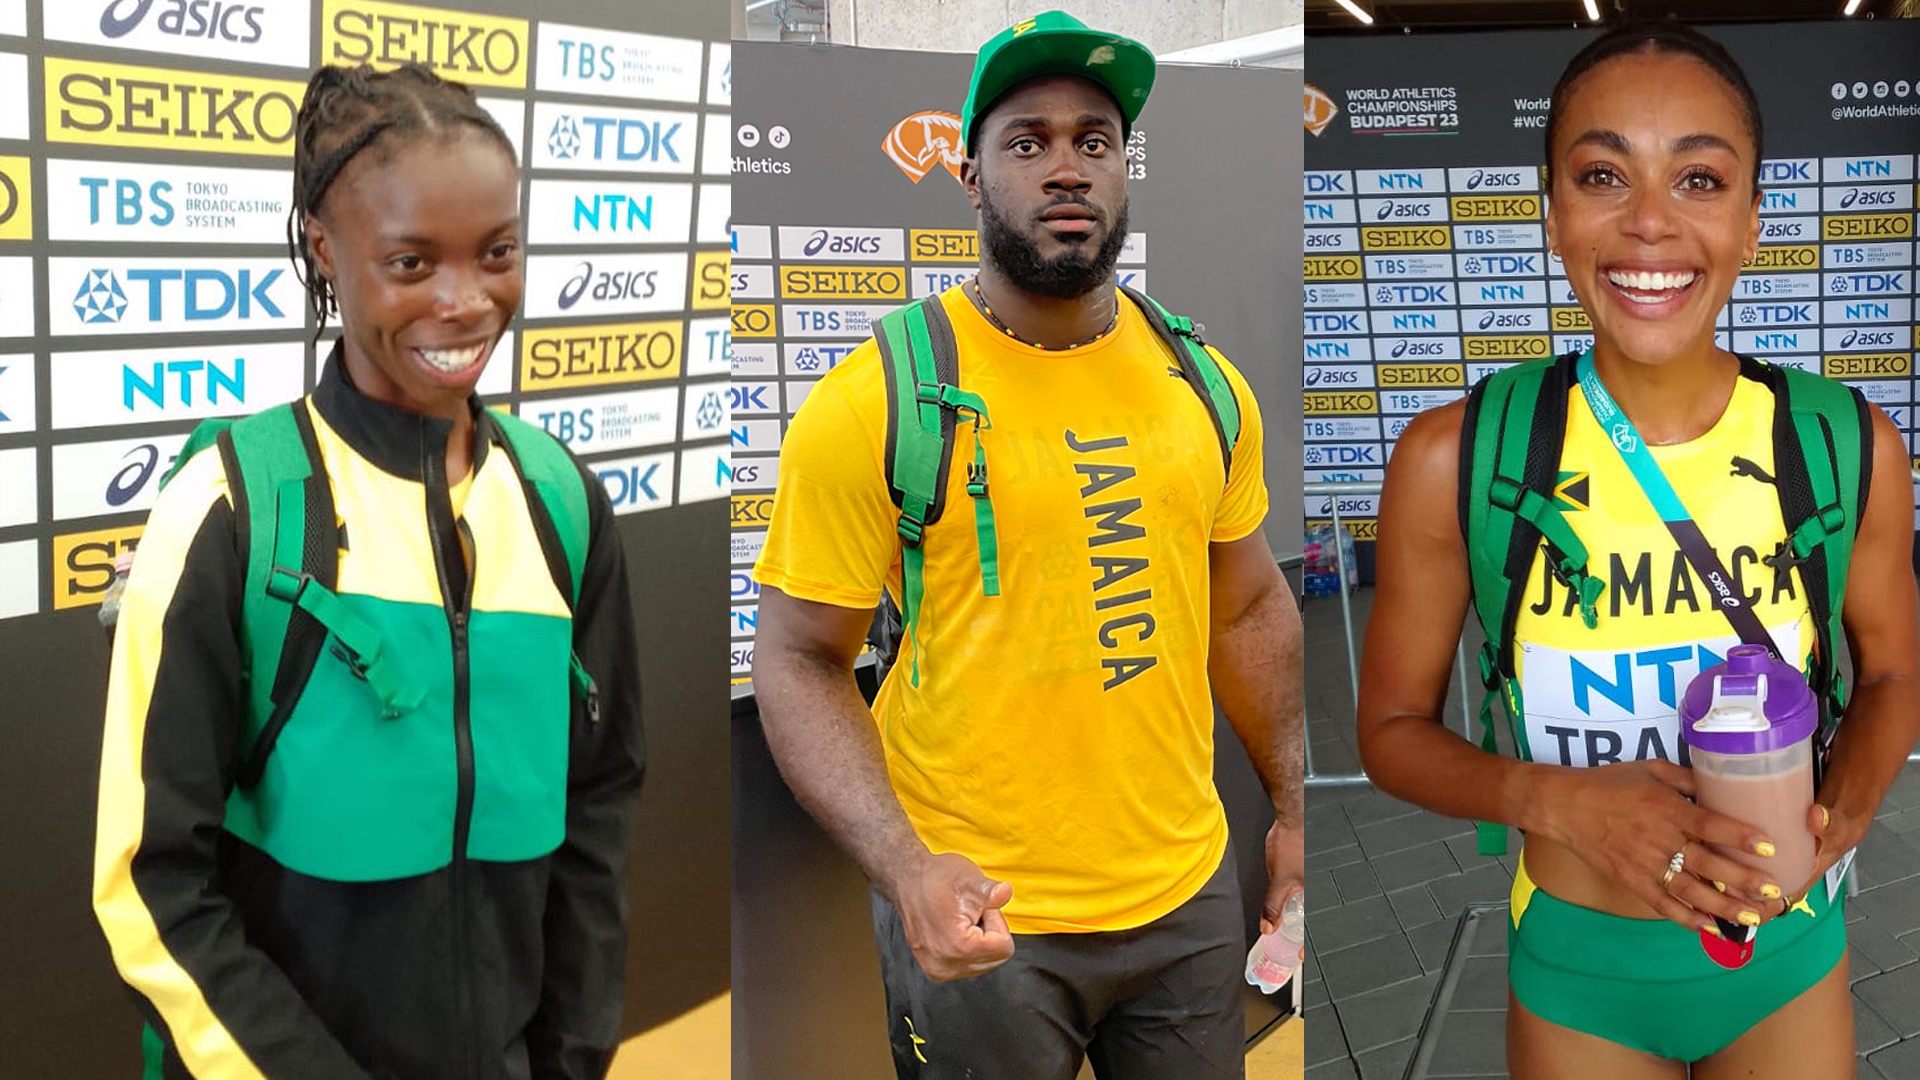 Rajindra Campbell, Adelle Tracey and Ackelia Smith made headways on the opening morning of the Budapest 23 World Athletics Championships